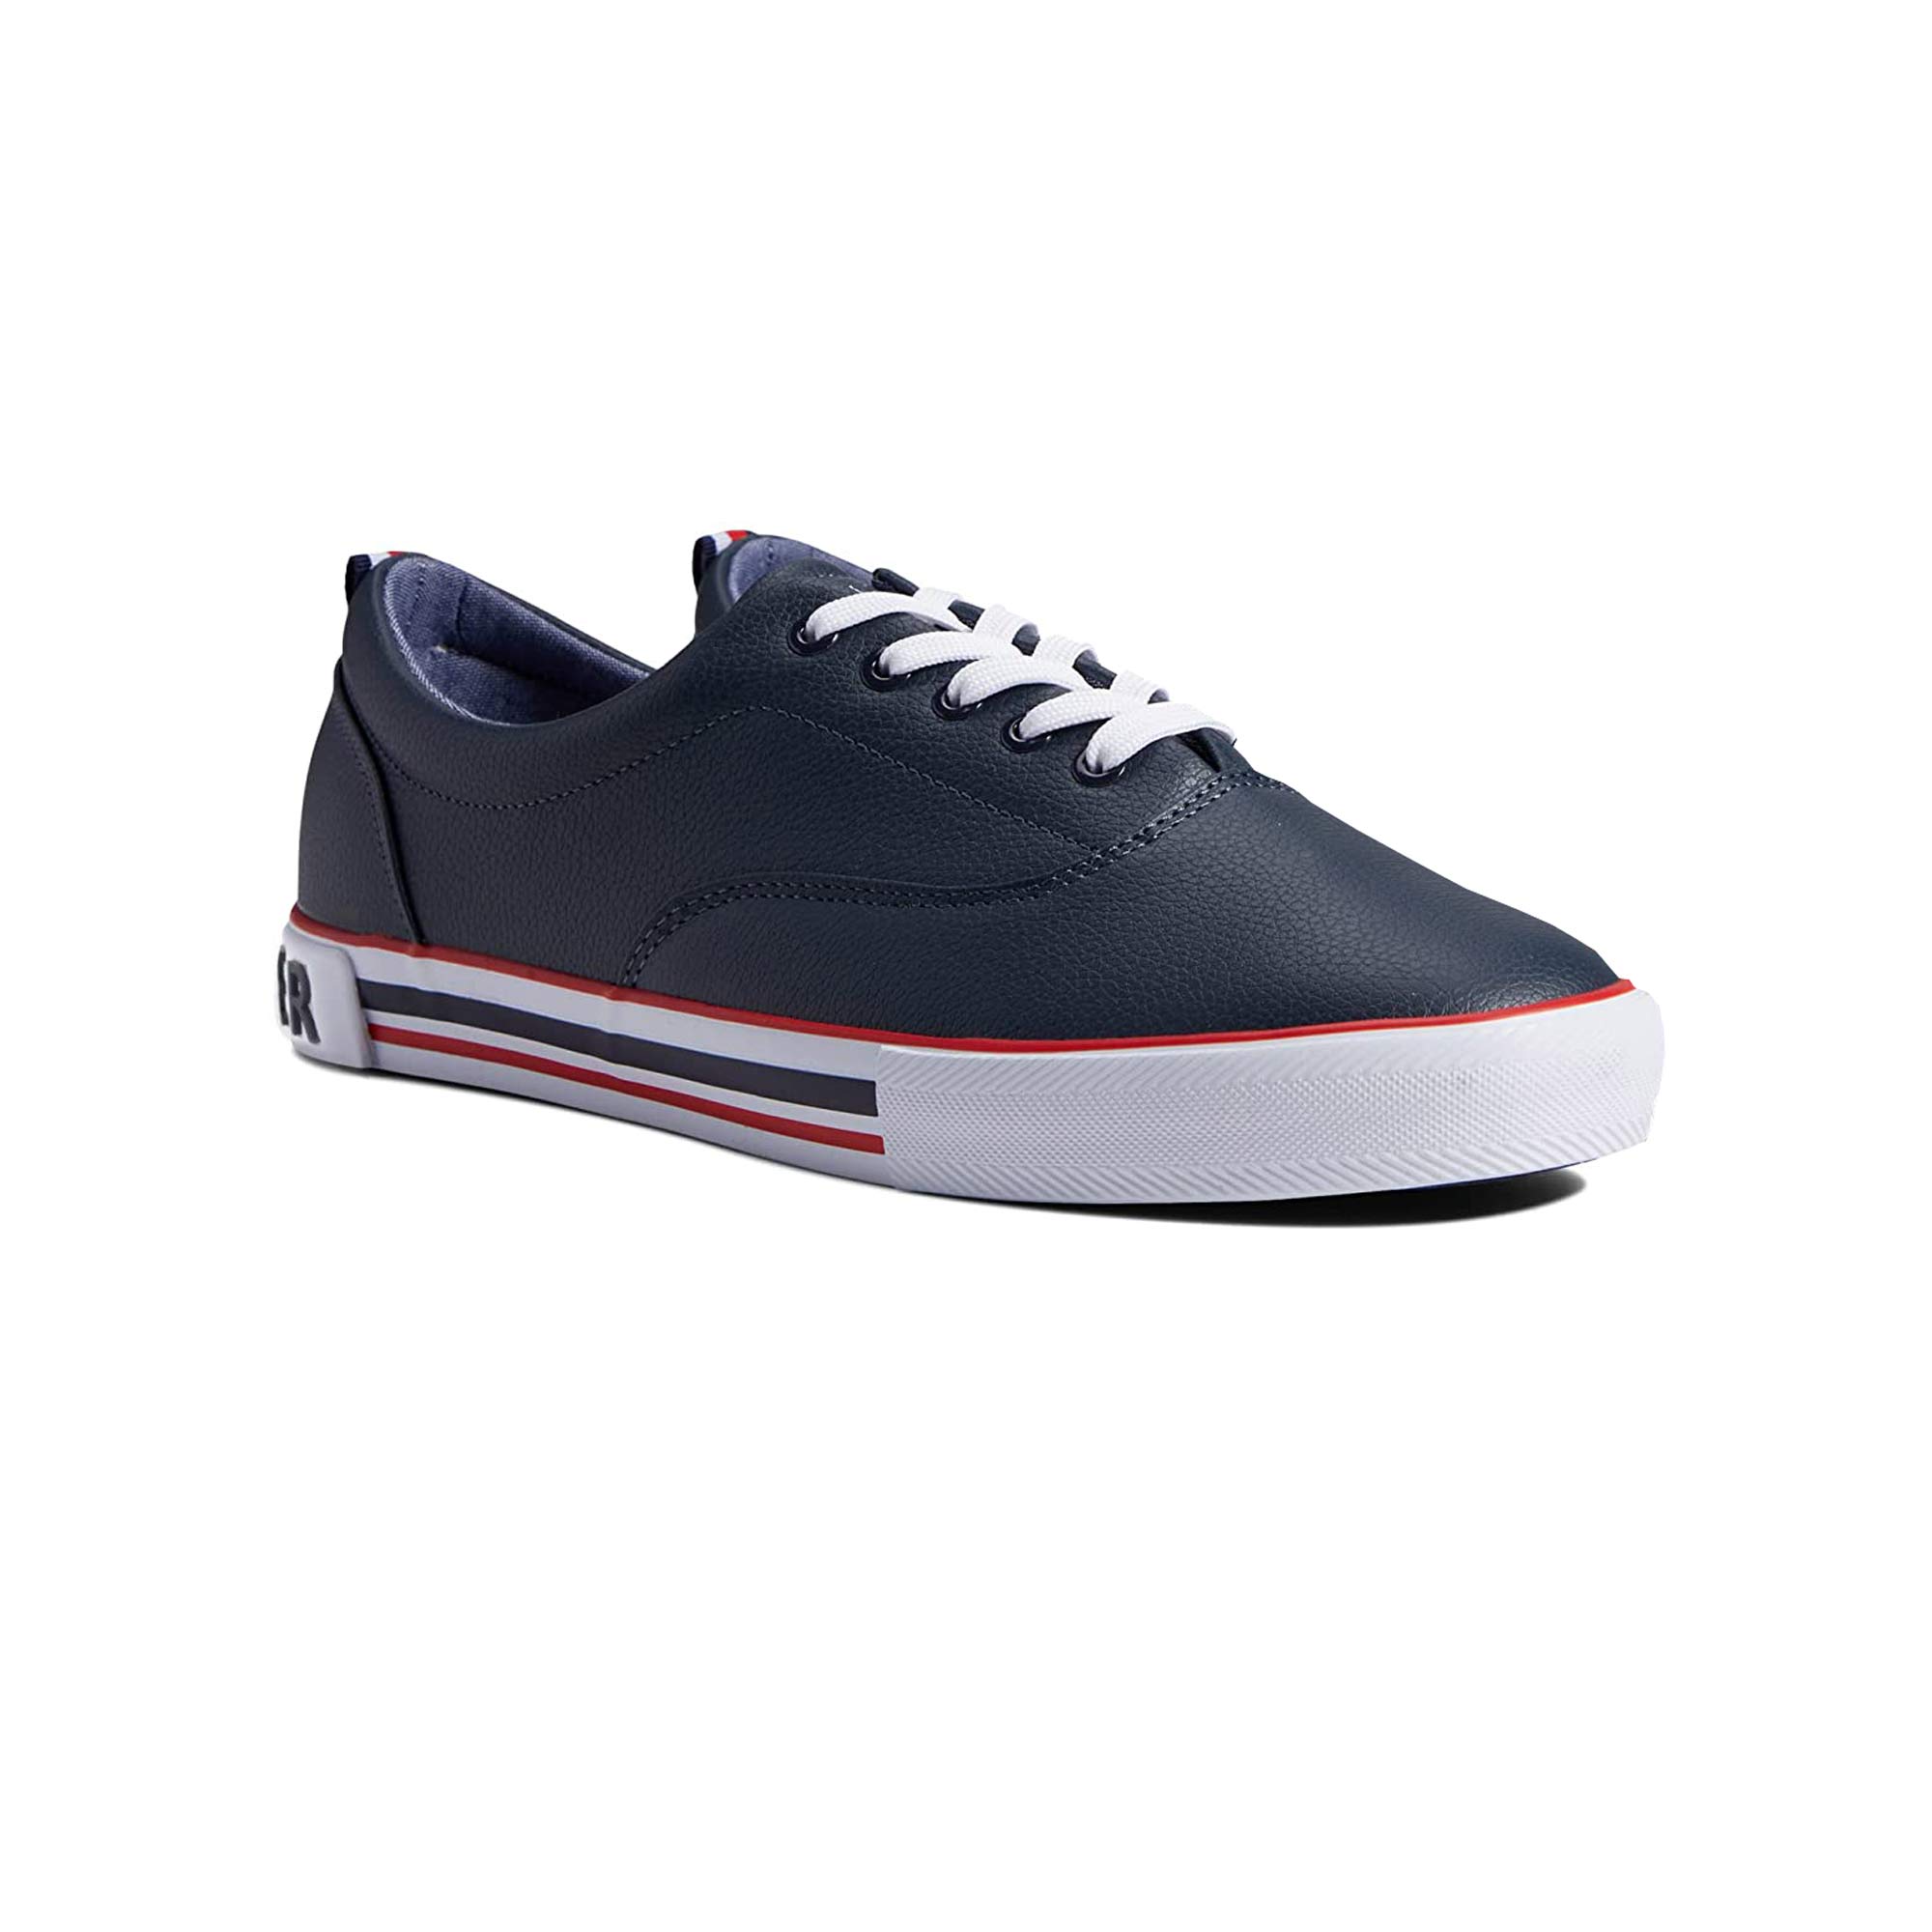 Tommy Hilfiger Paines Causal Running Shoes for Men - Navy - Chaussures Bari à